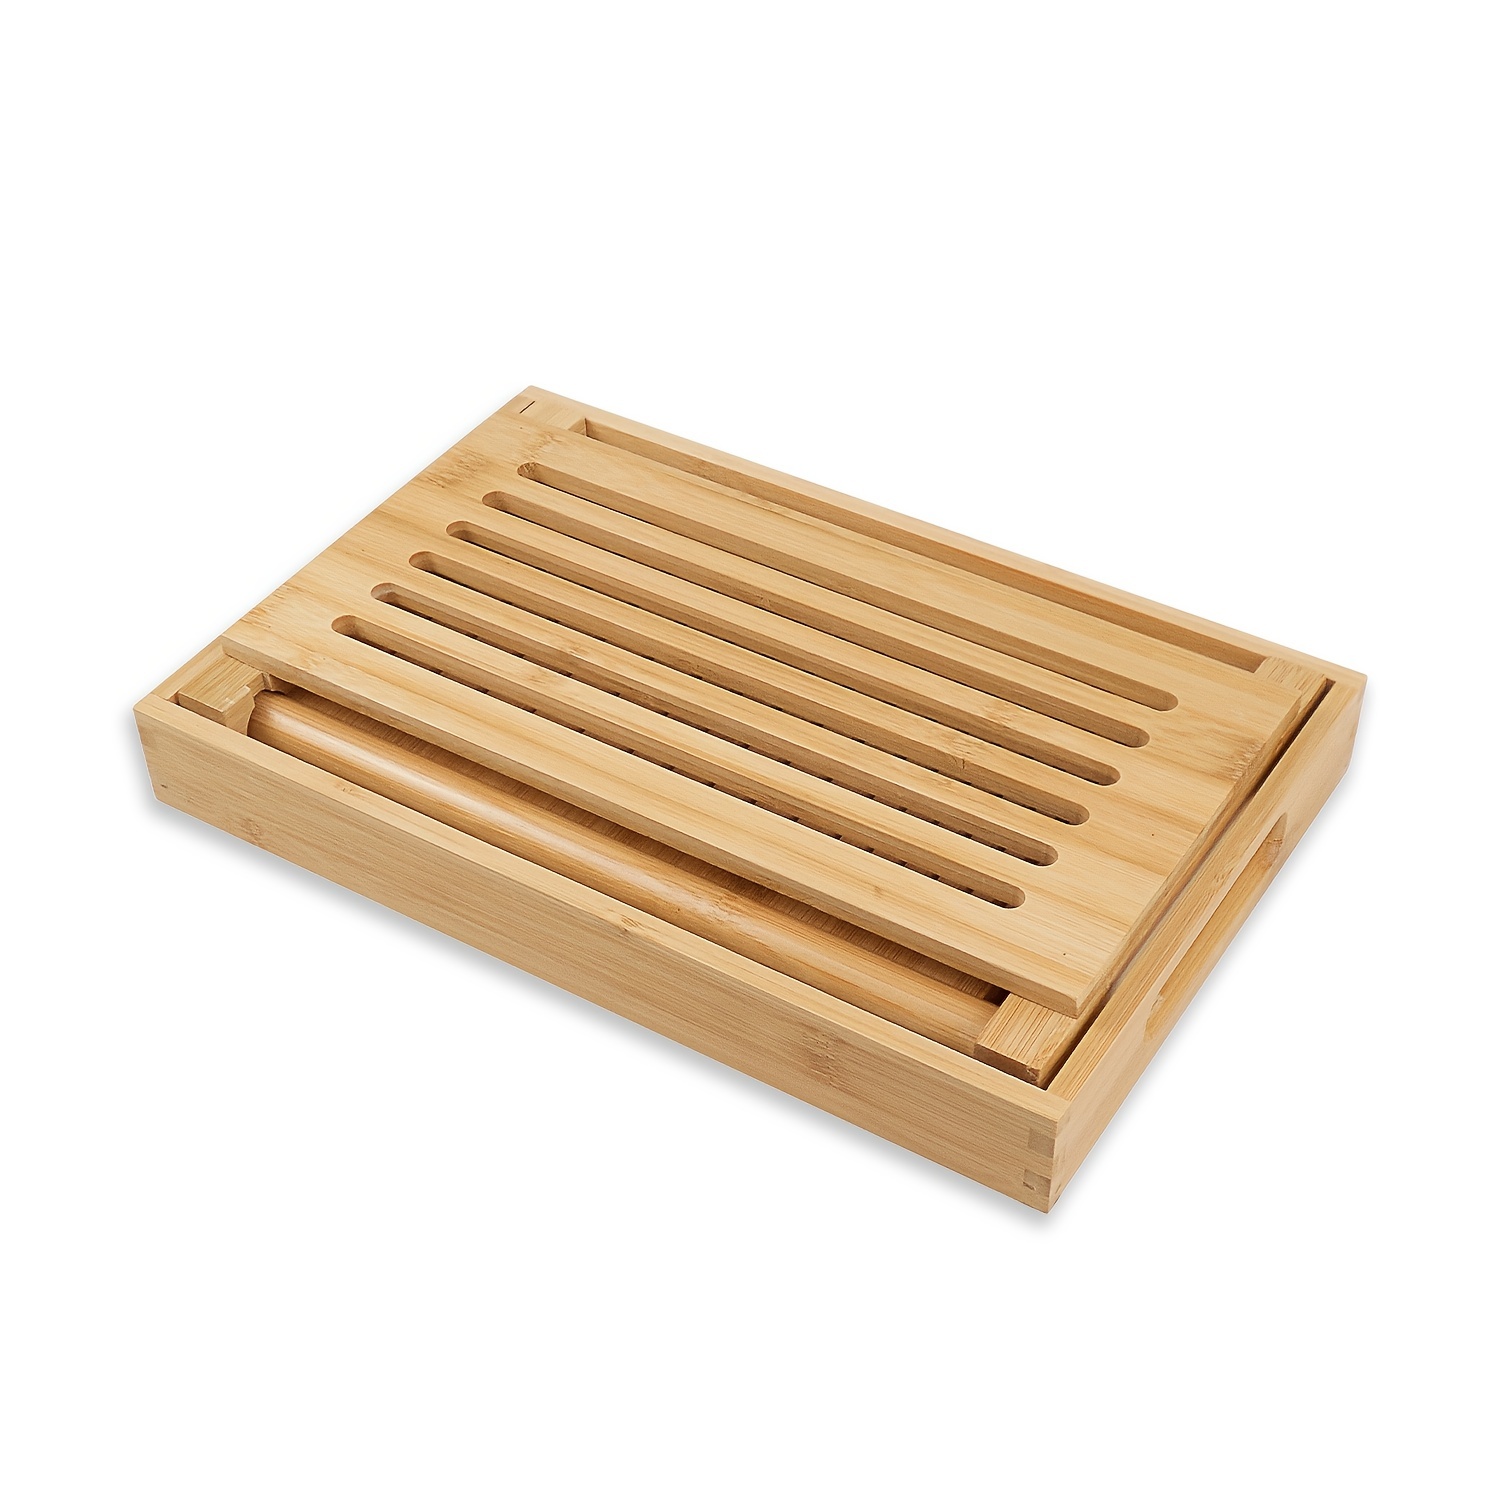 Bamboo Bread Slicer, Adjustable Bread Slicer Guide with 3 Thickness Size,  Foldable Compact Chopping Cutting Board, Great for Homemade Bread, Cakes